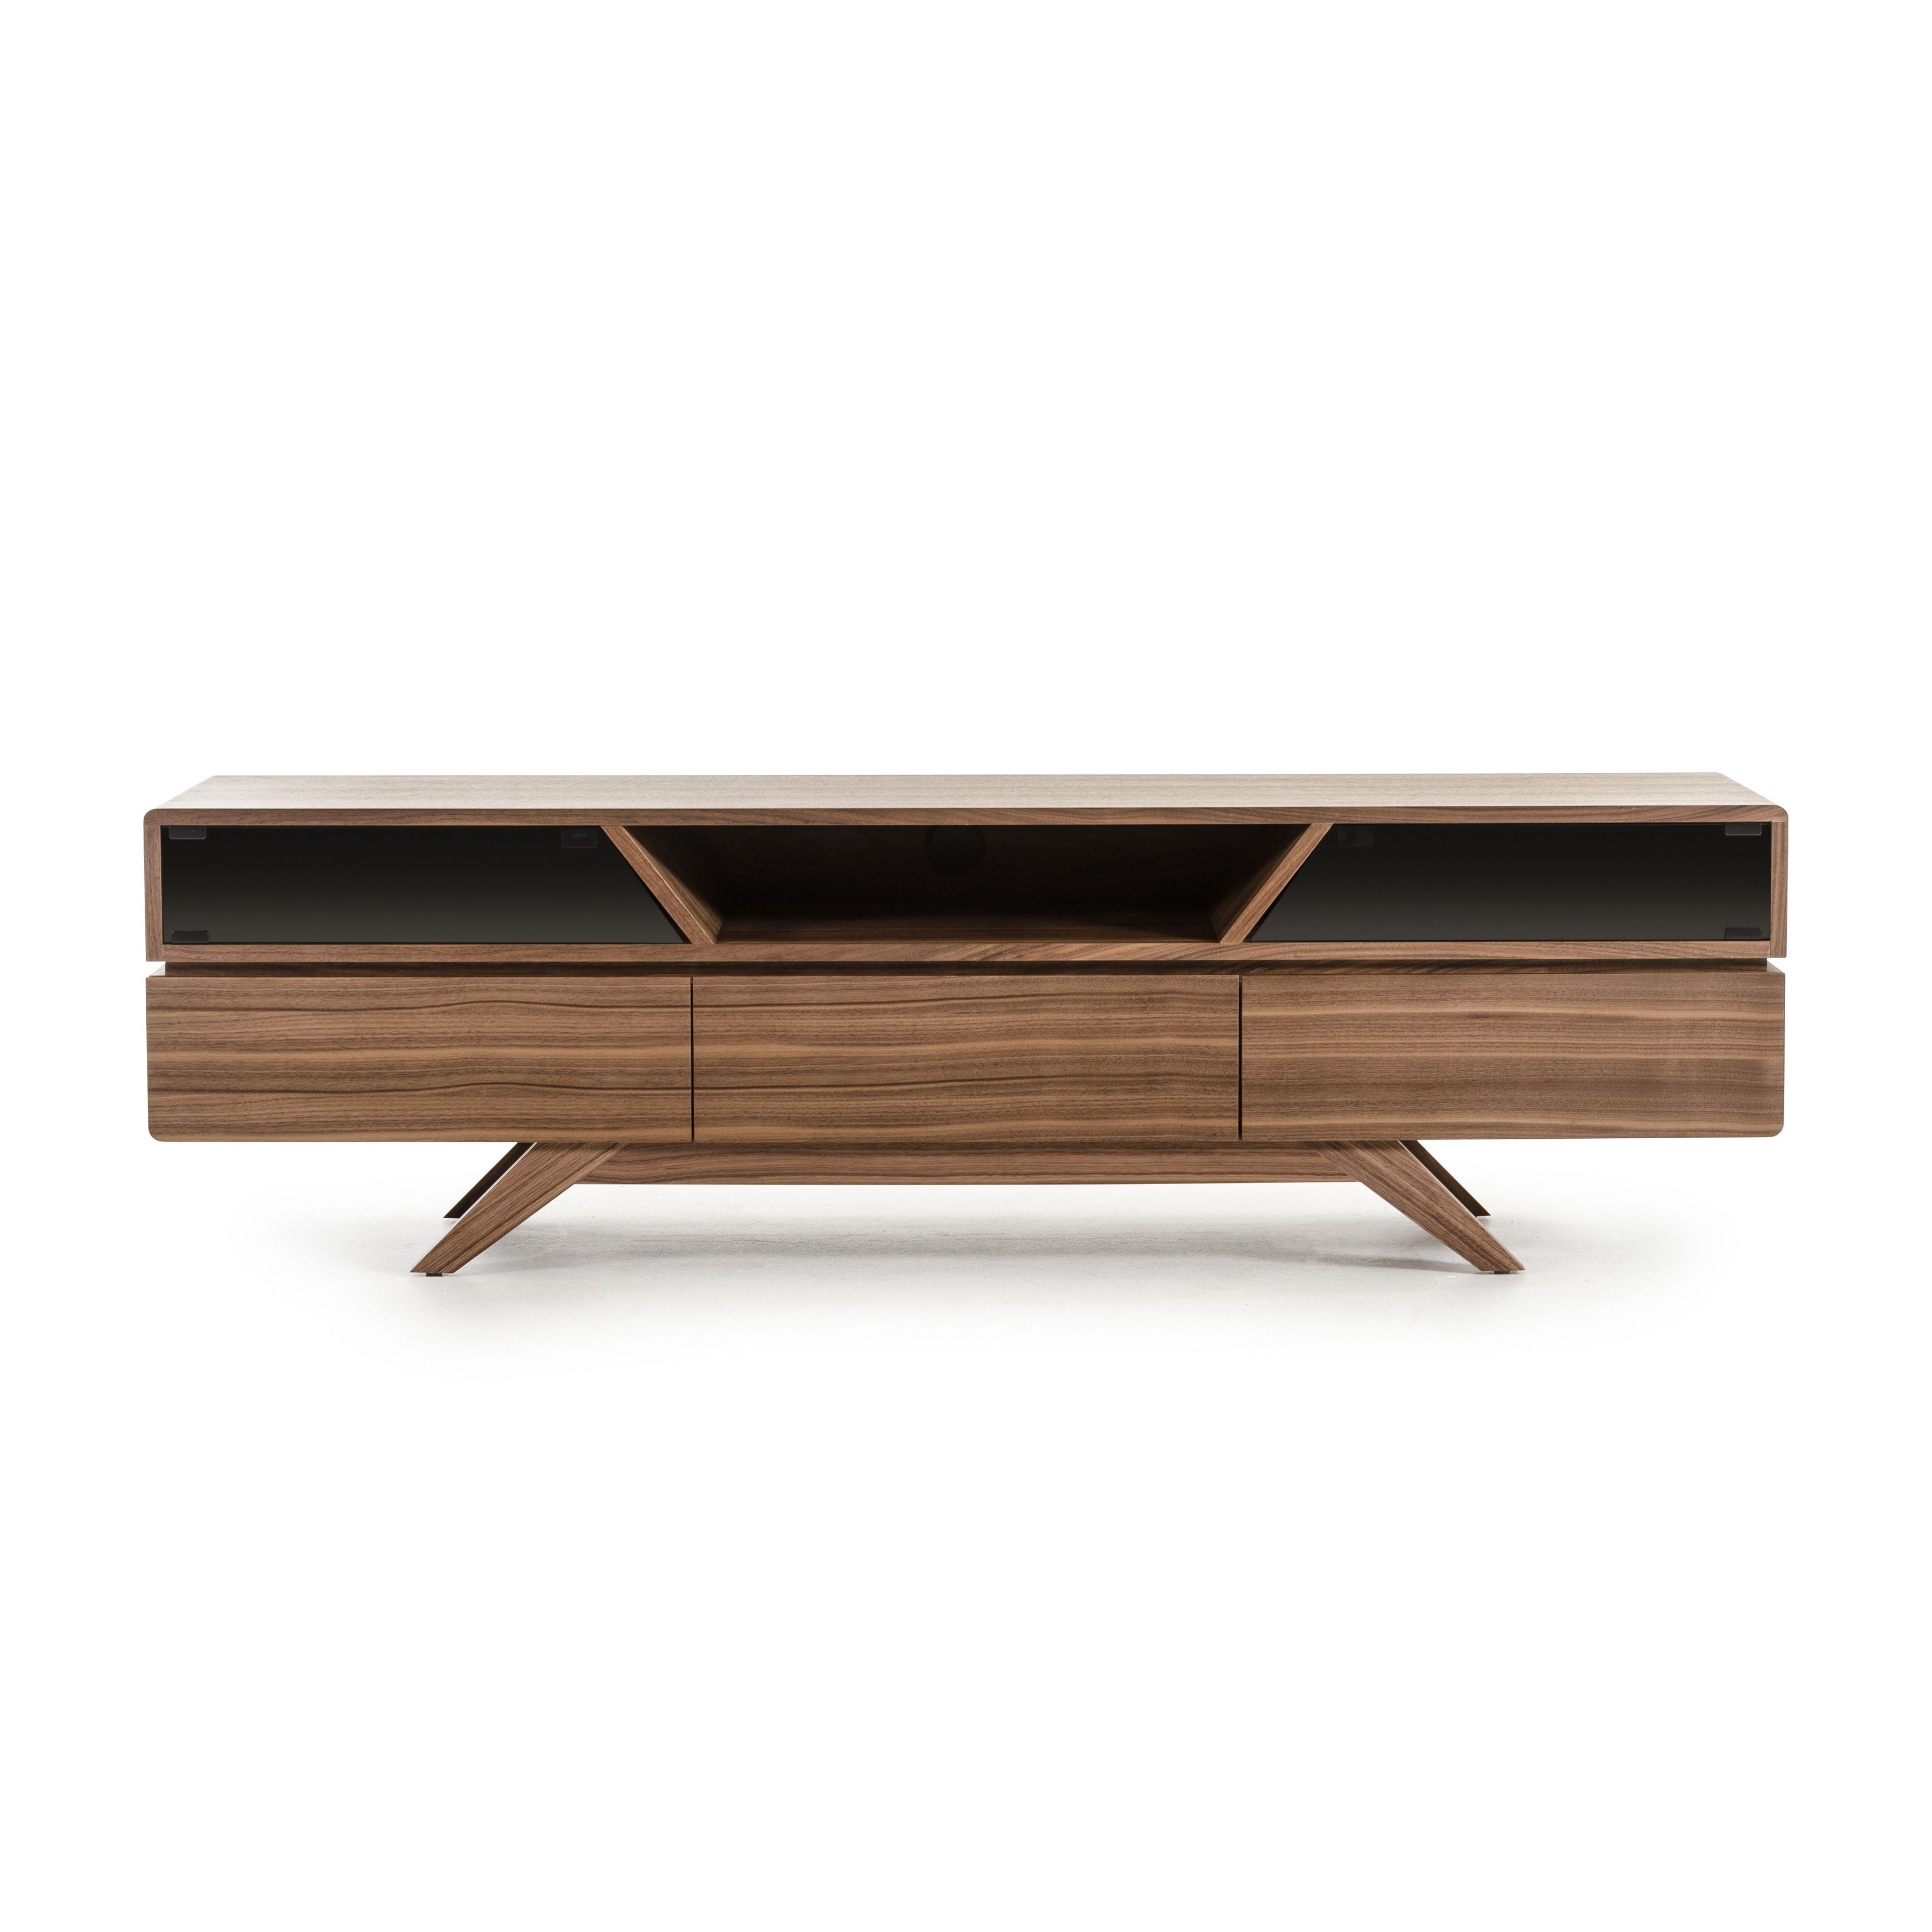 Most Current Tv Stands With Rounded Corners With Let Your Tv Stand Out On This Soria Walnut Tv Stand From Vig (View 9 of 20)